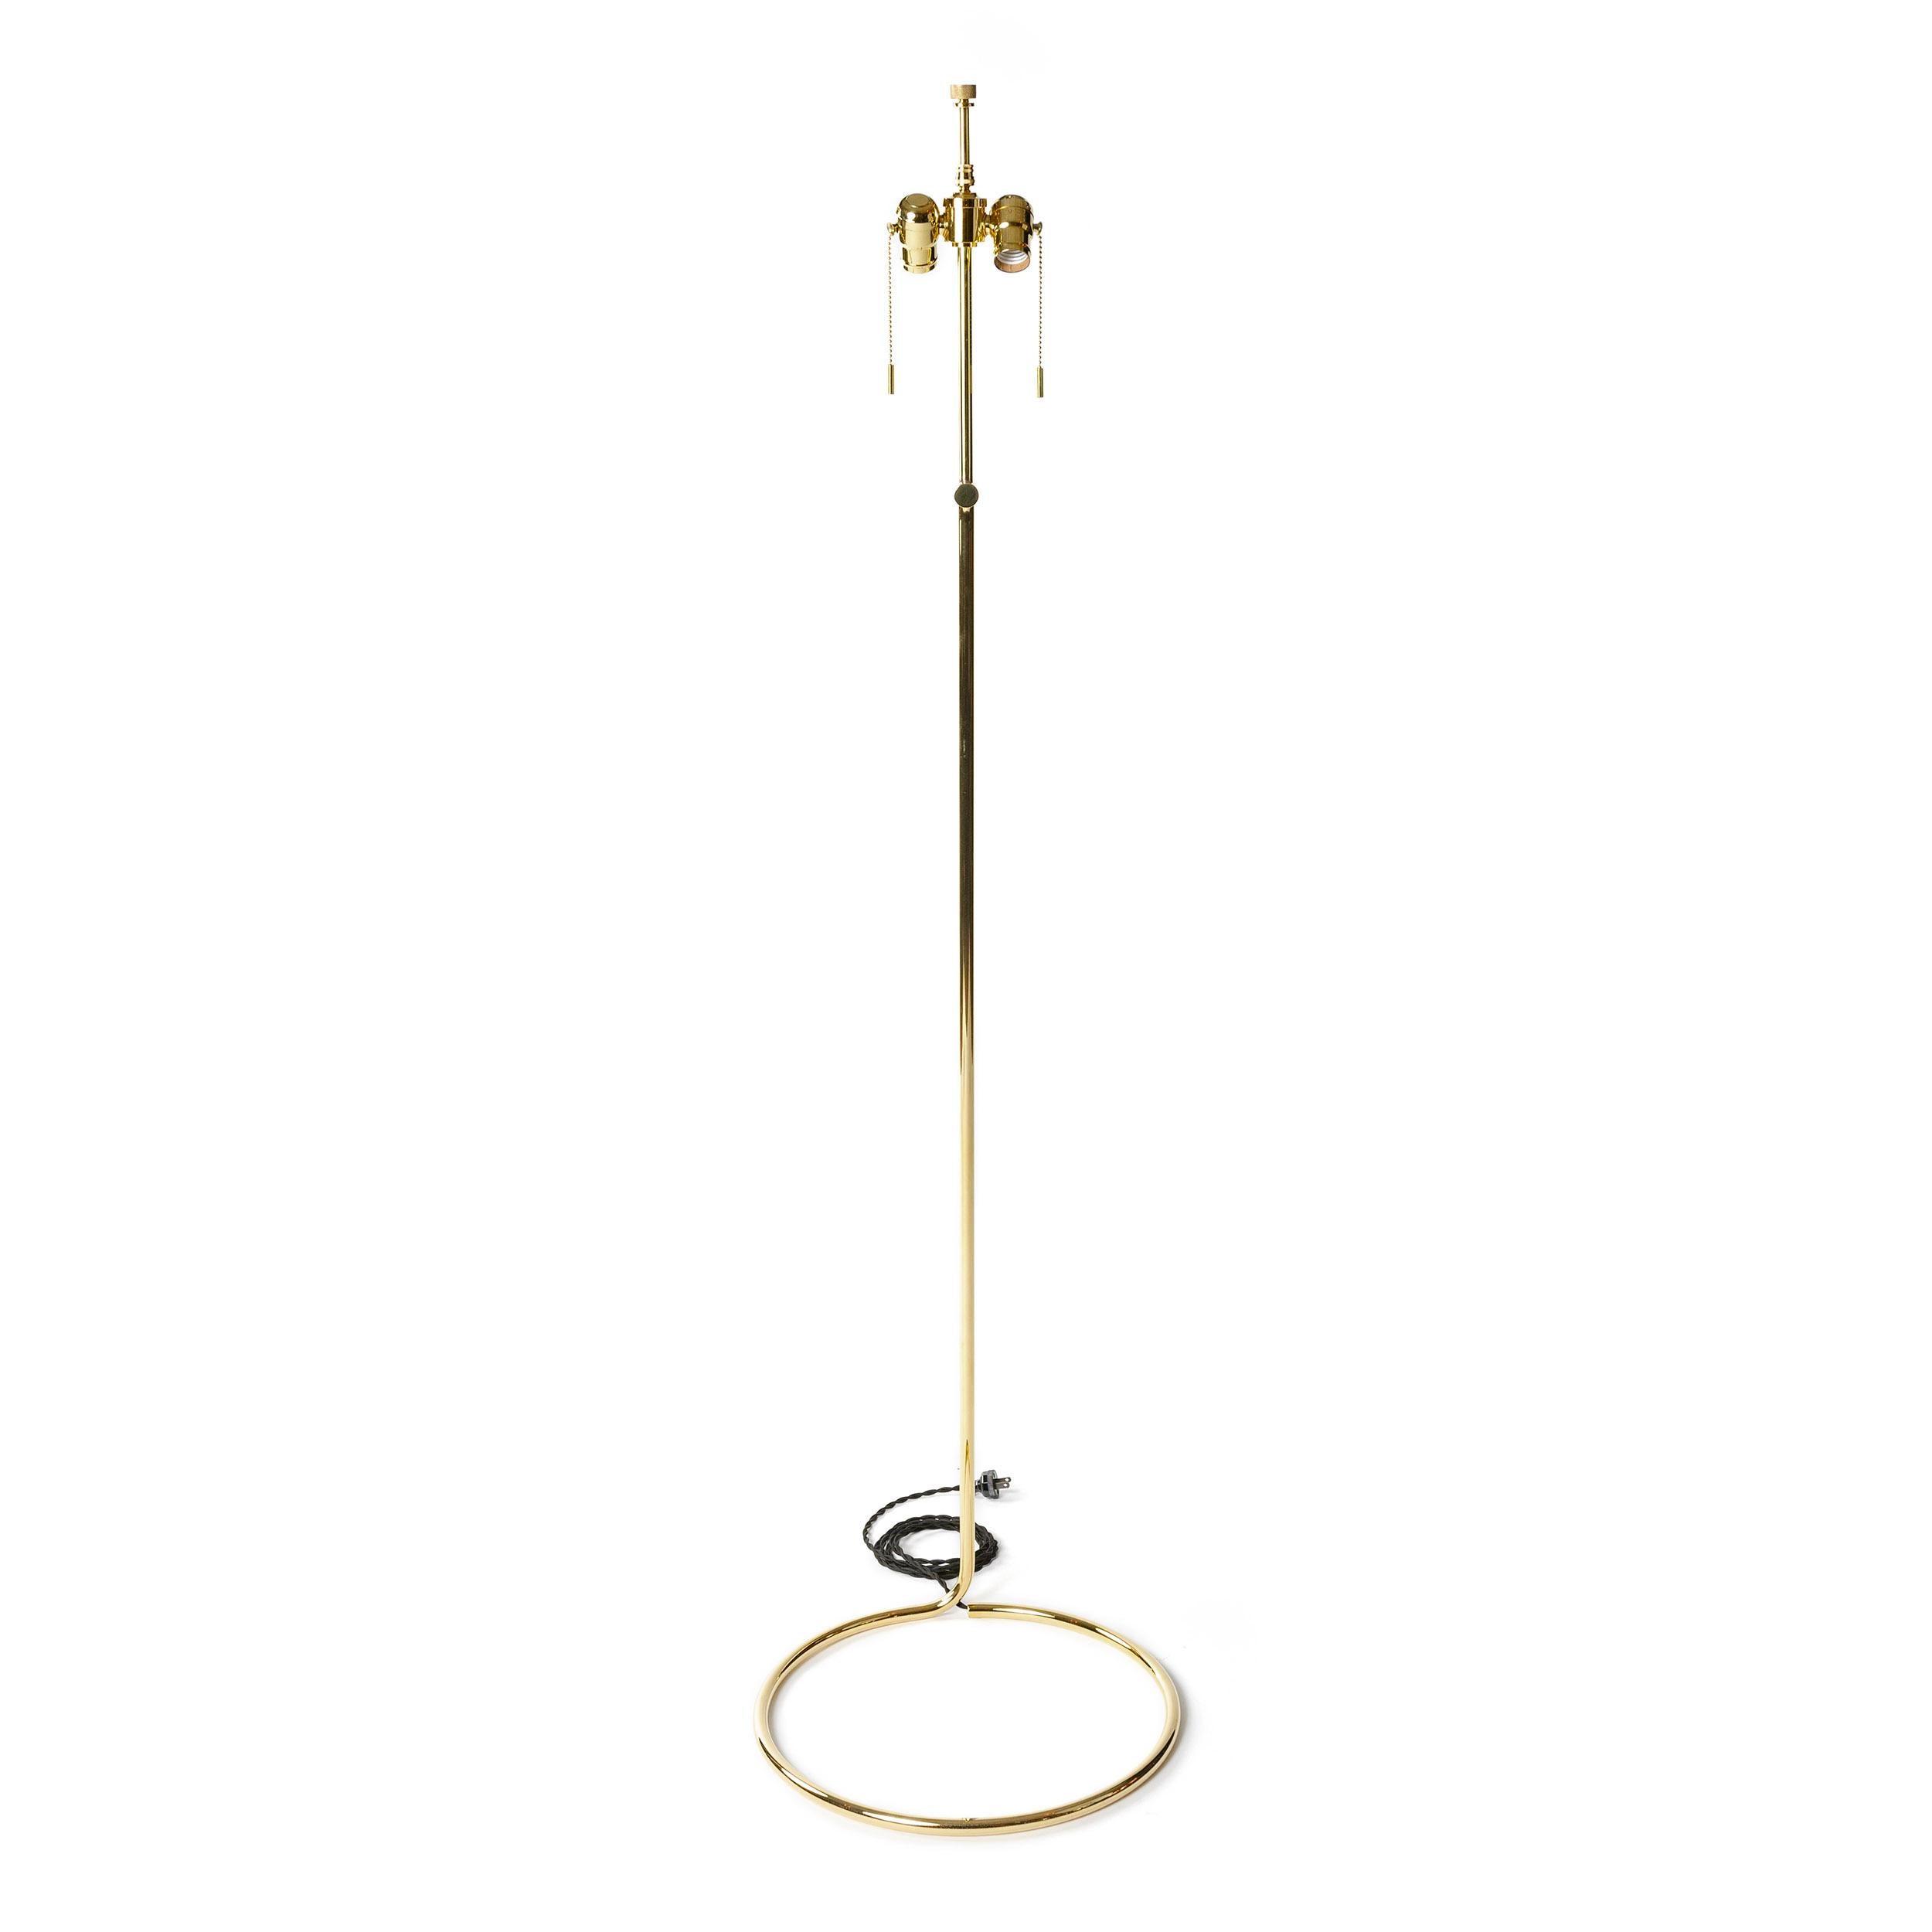 A spare, sinuous floor lamp made from a continuous coil of thinly gauged bronze tubing in a polished finish. Shade shown for sample only / not included. Designed and manufactured by Wyeth in the USA, 2017.